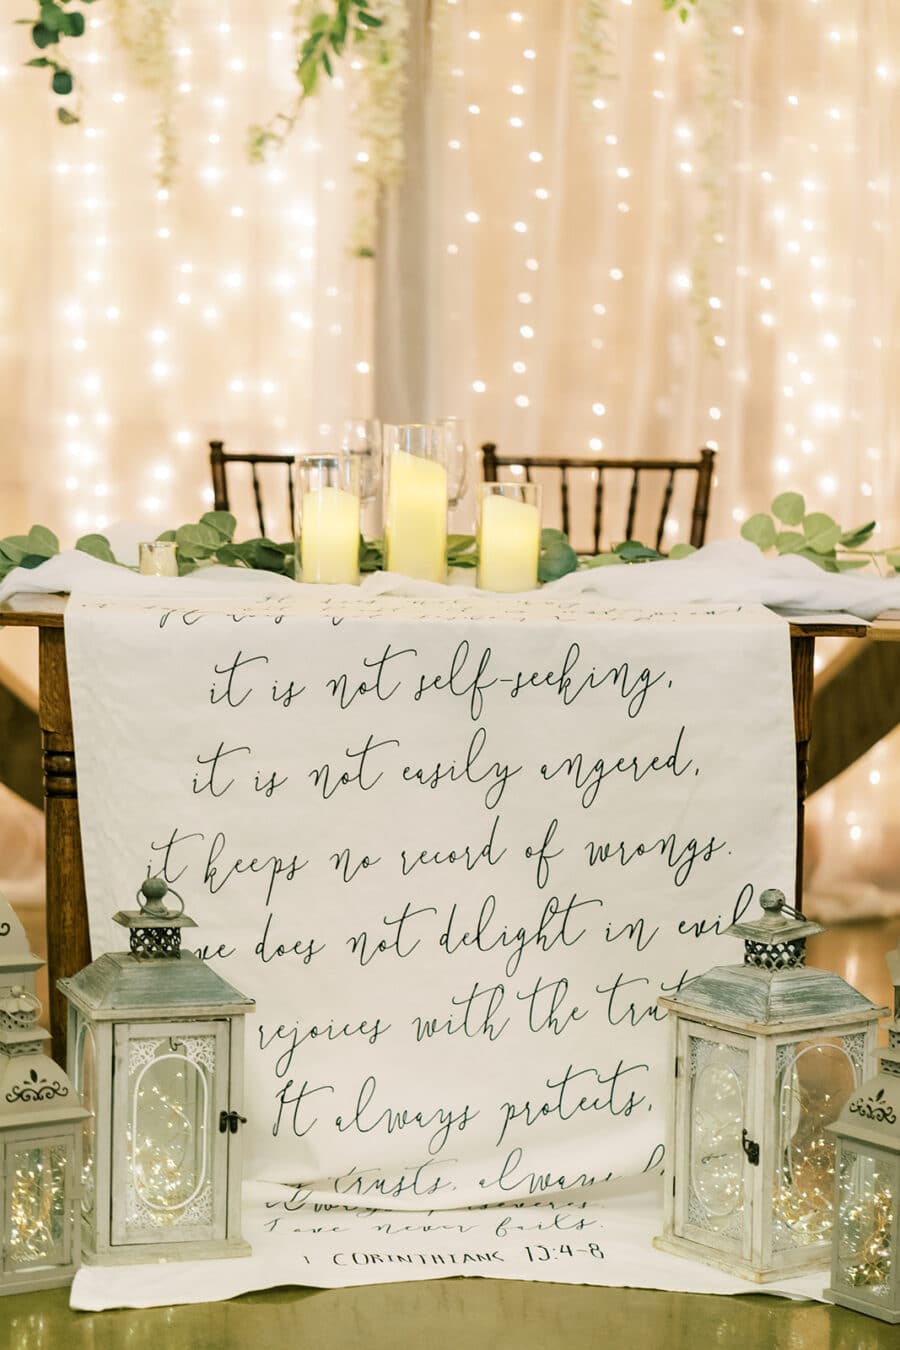 Wedding sweetheart table with canvas poem | Nashville Bride Guide